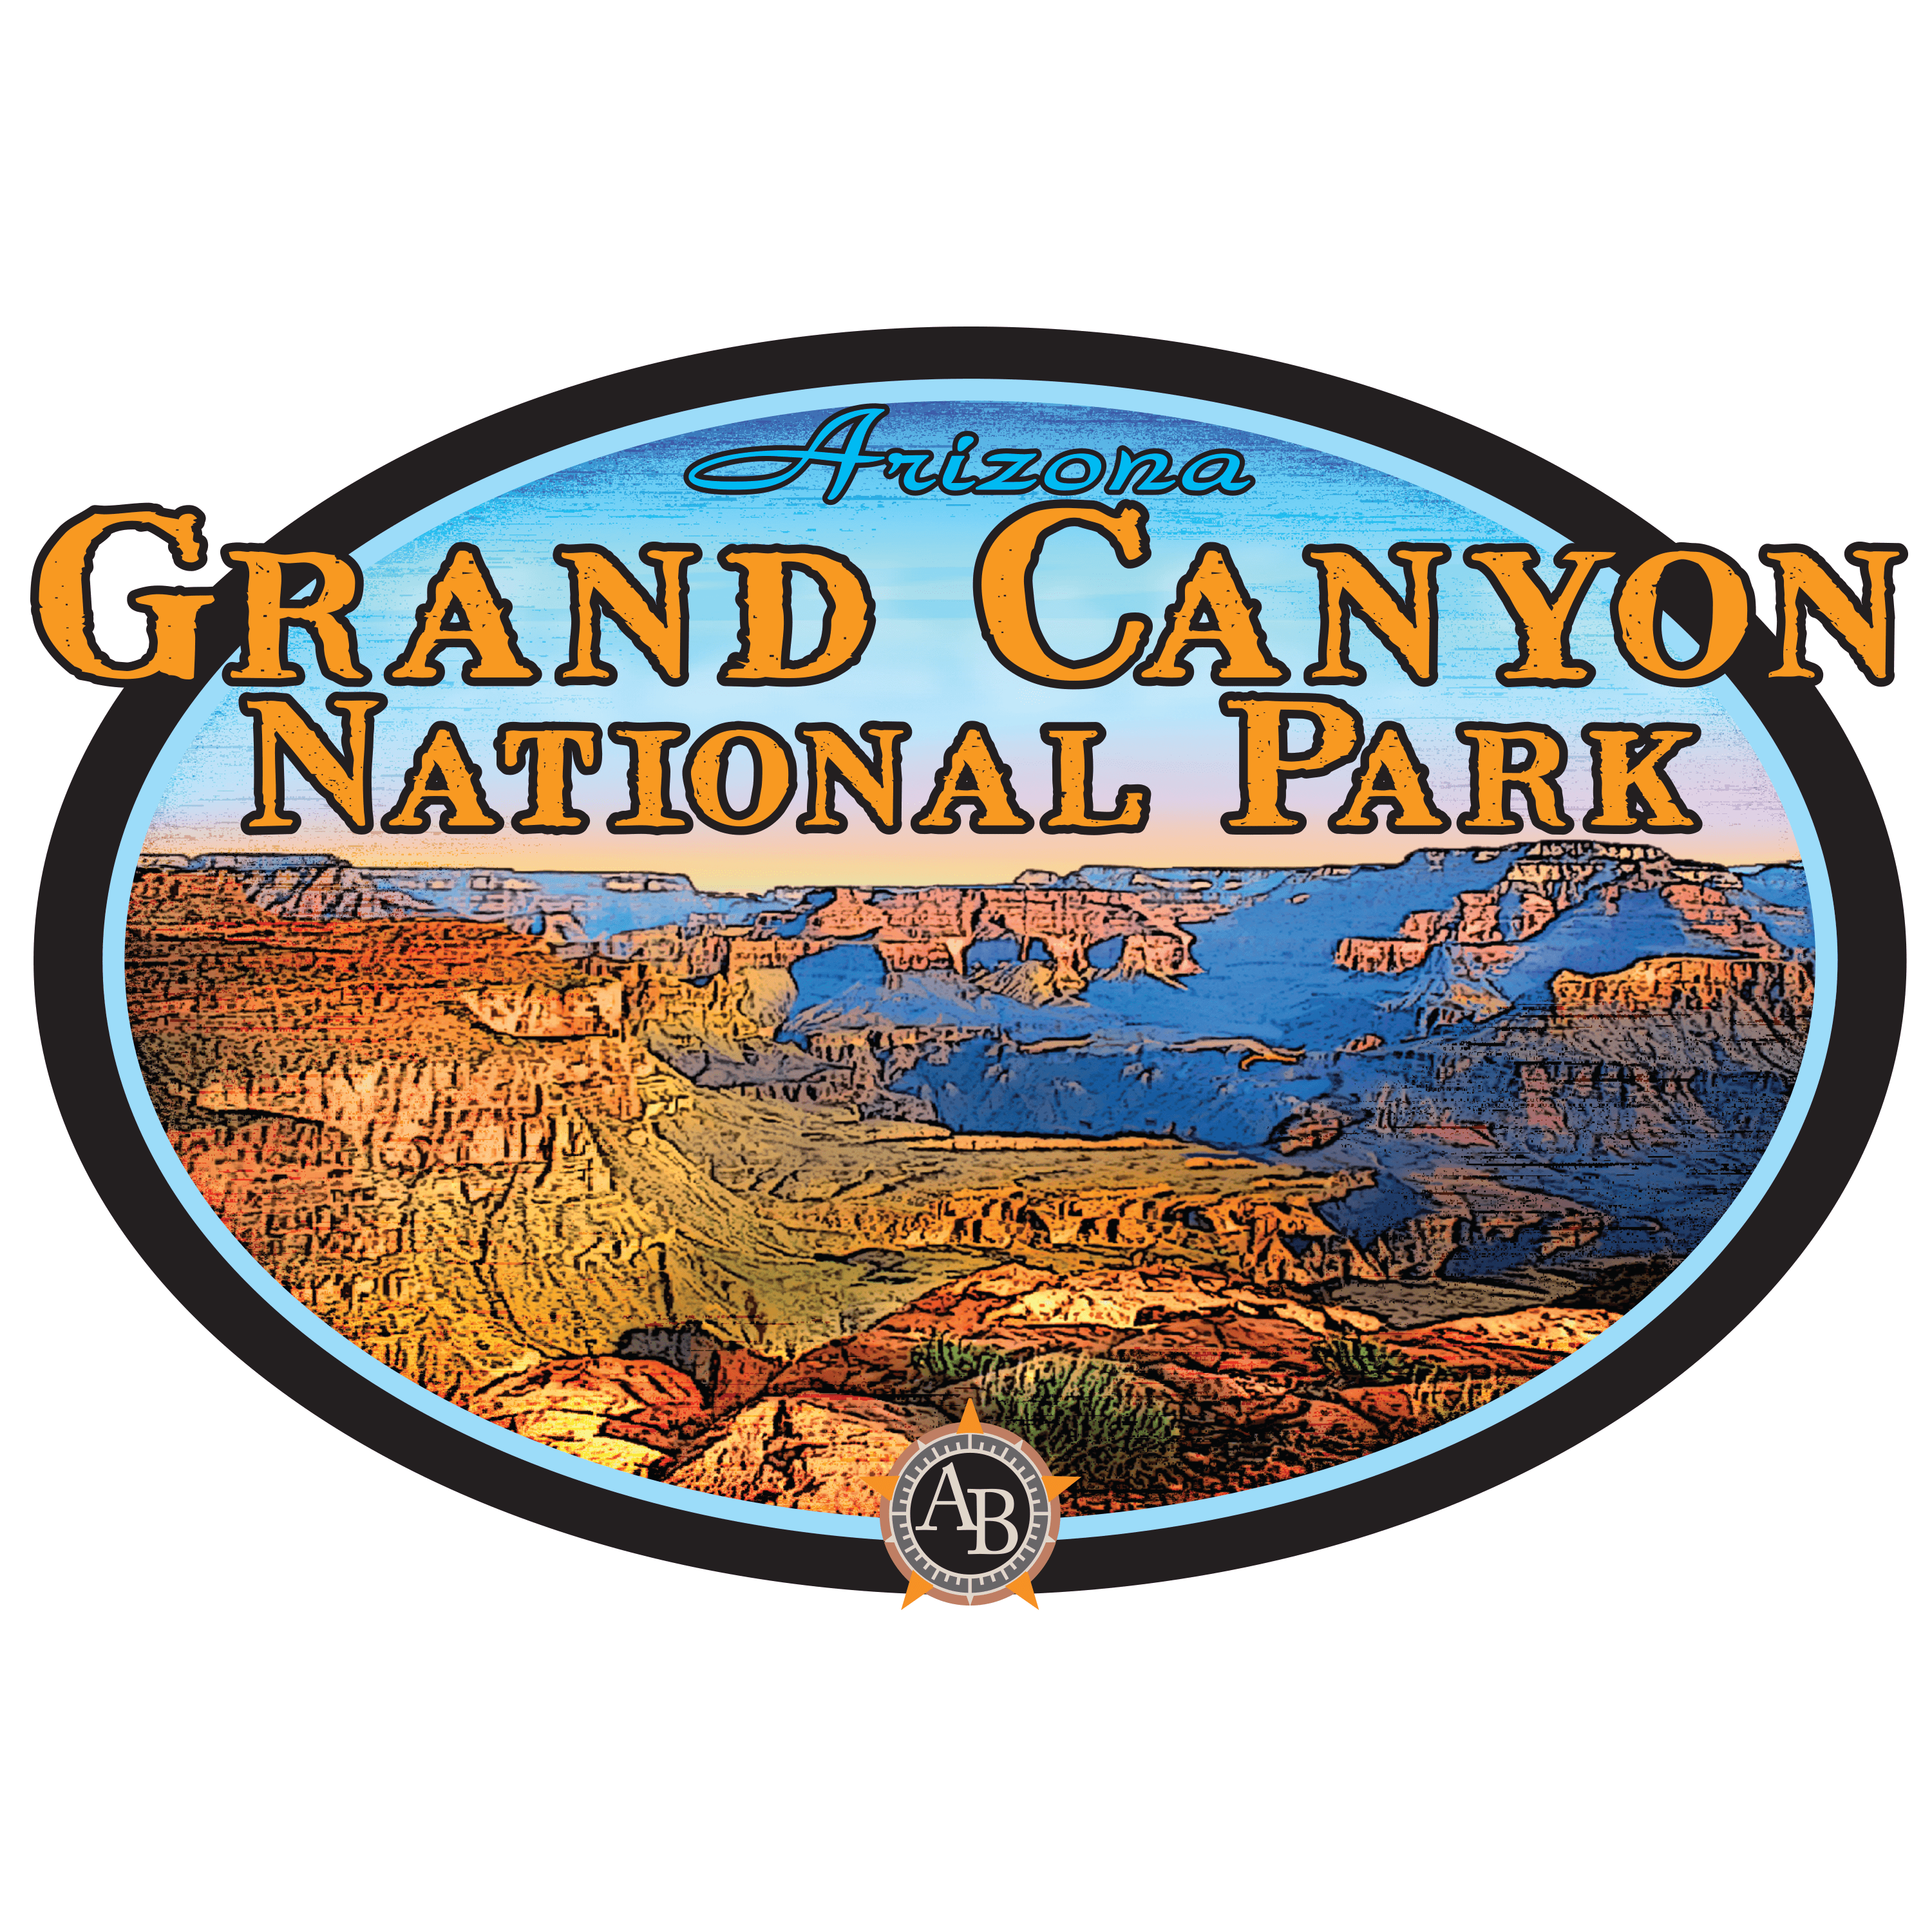 Grand Canyon National Park Logo - American Backcountry Graphic T-shirt